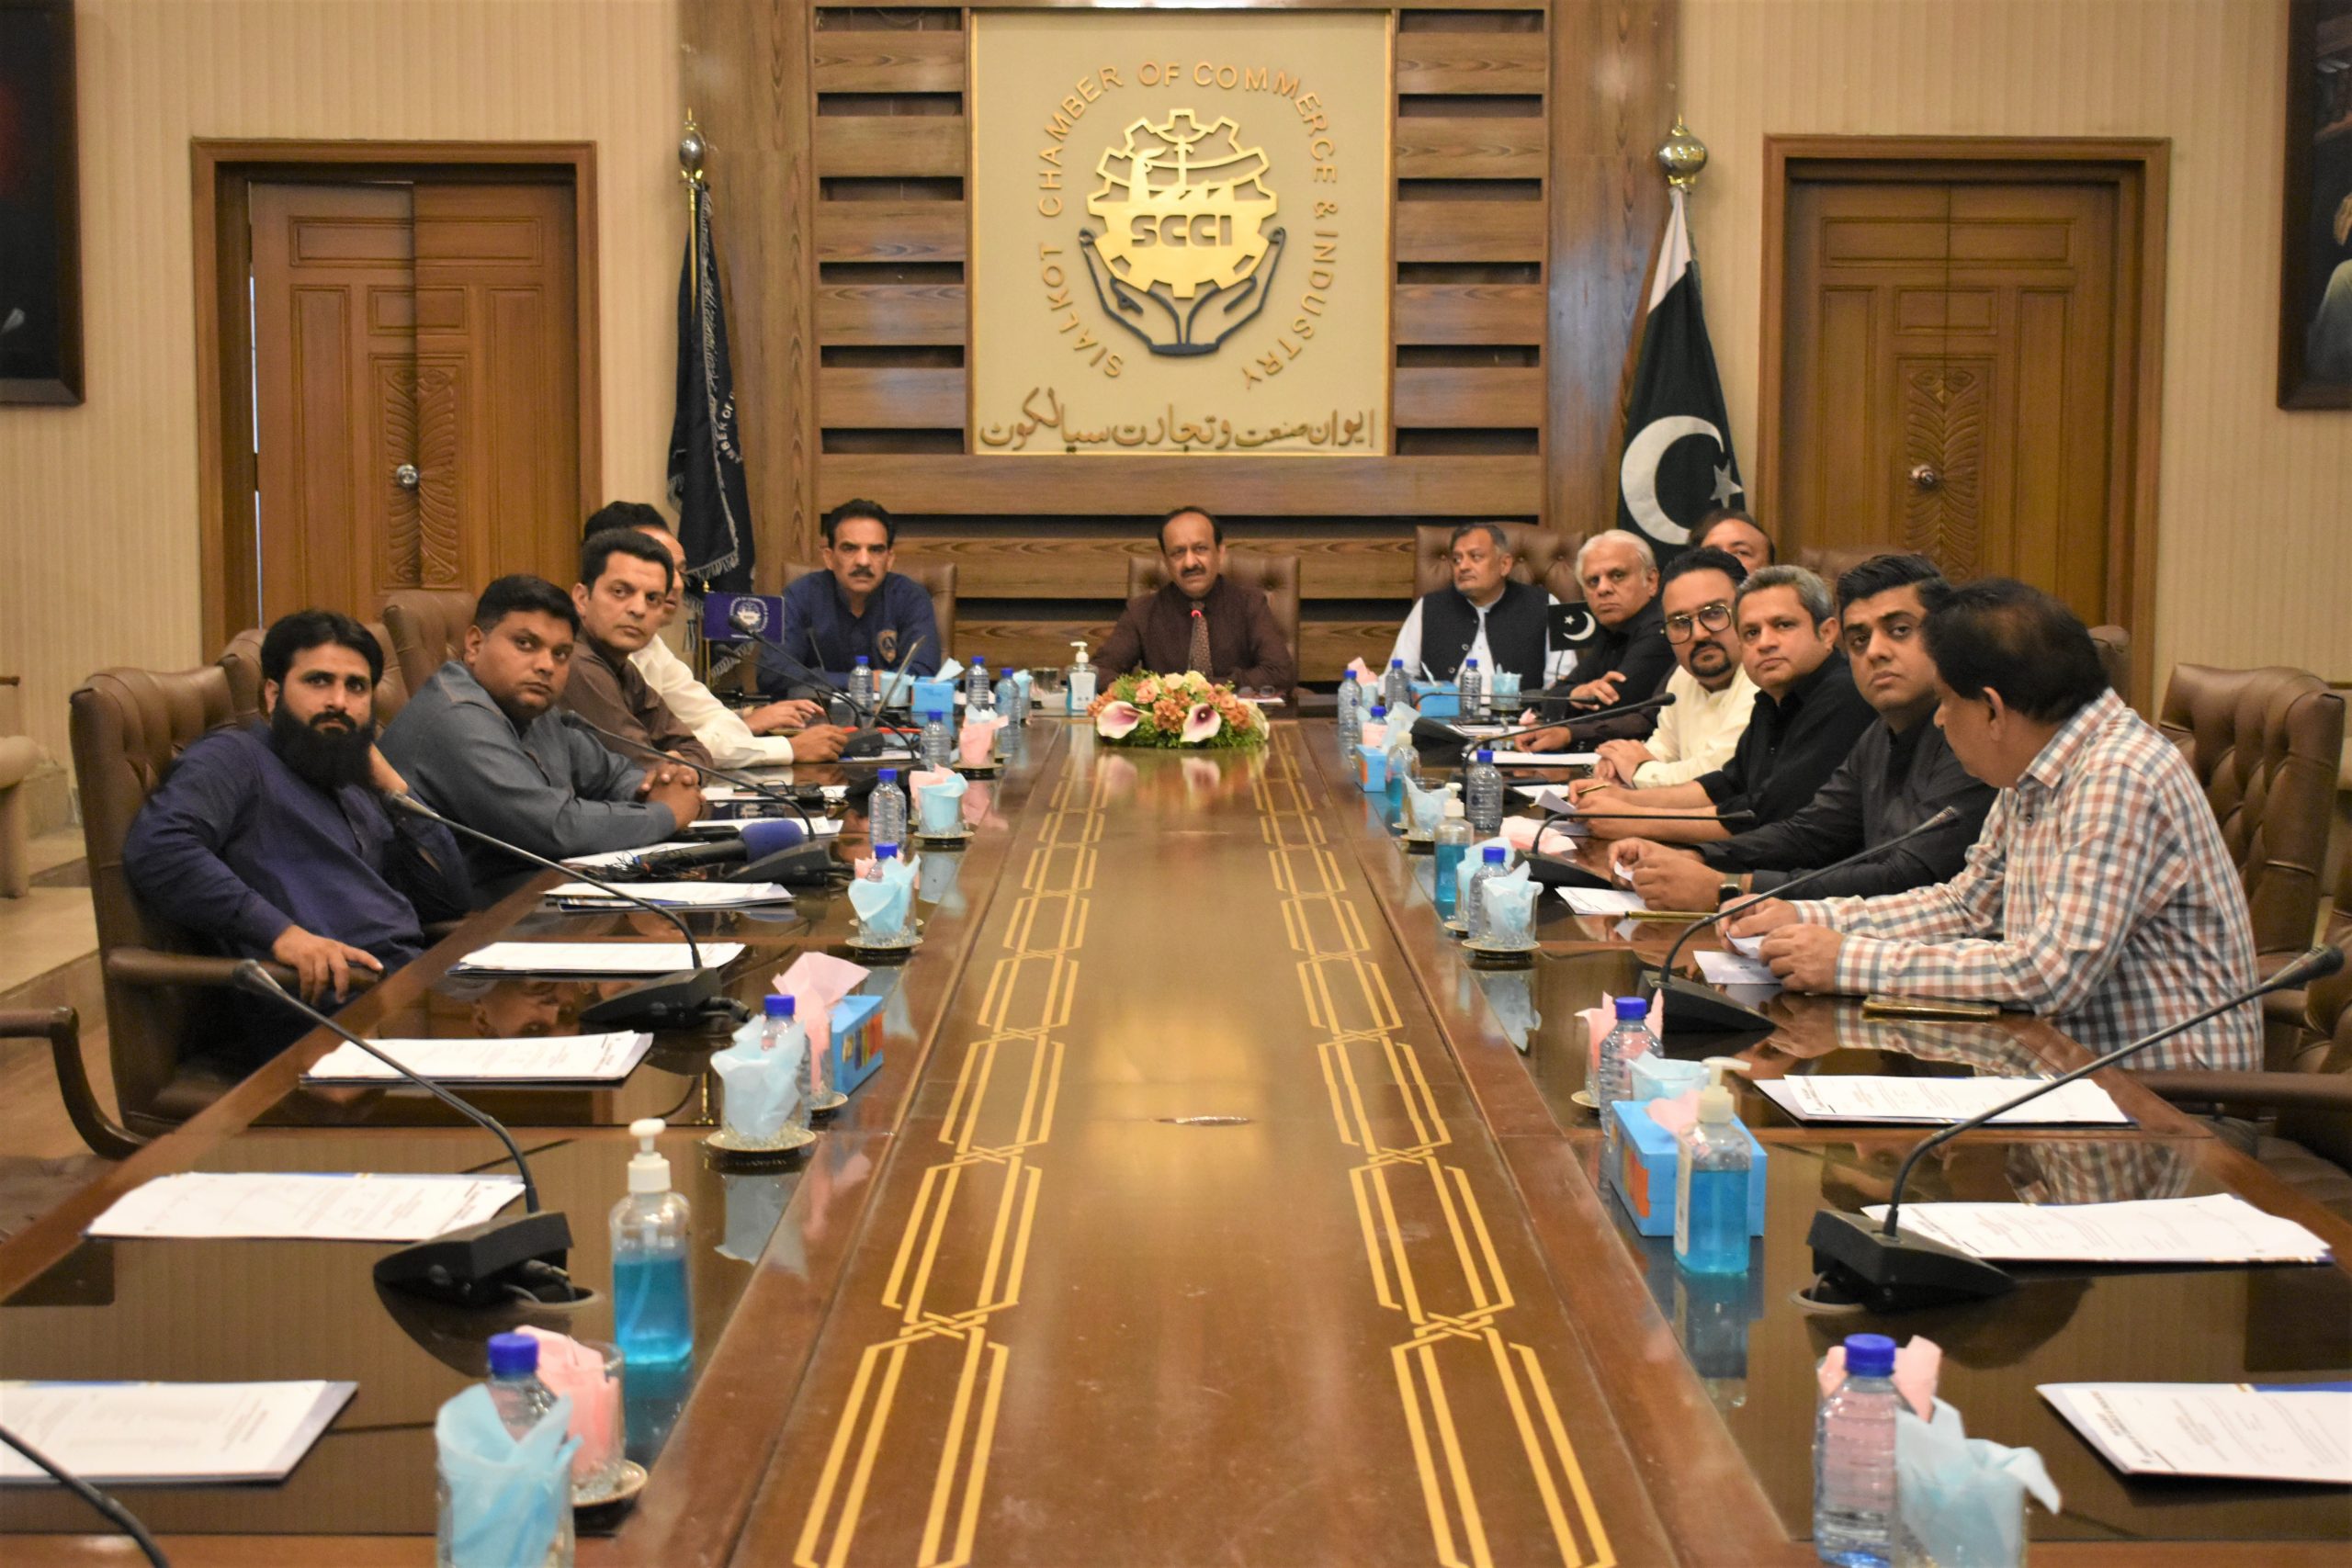 On April 01, 2022, A Meeting of SCCI’s Departmental Committee on Garrison HQ/Cantonment Board Affairs was held at Sialkot Chamber of Commerce and Industry to discuss the Notices regarding the Property Tax and Conservation Charges imposed by the Cantonment Management on the residents of Cantonment Area of Sialkot.